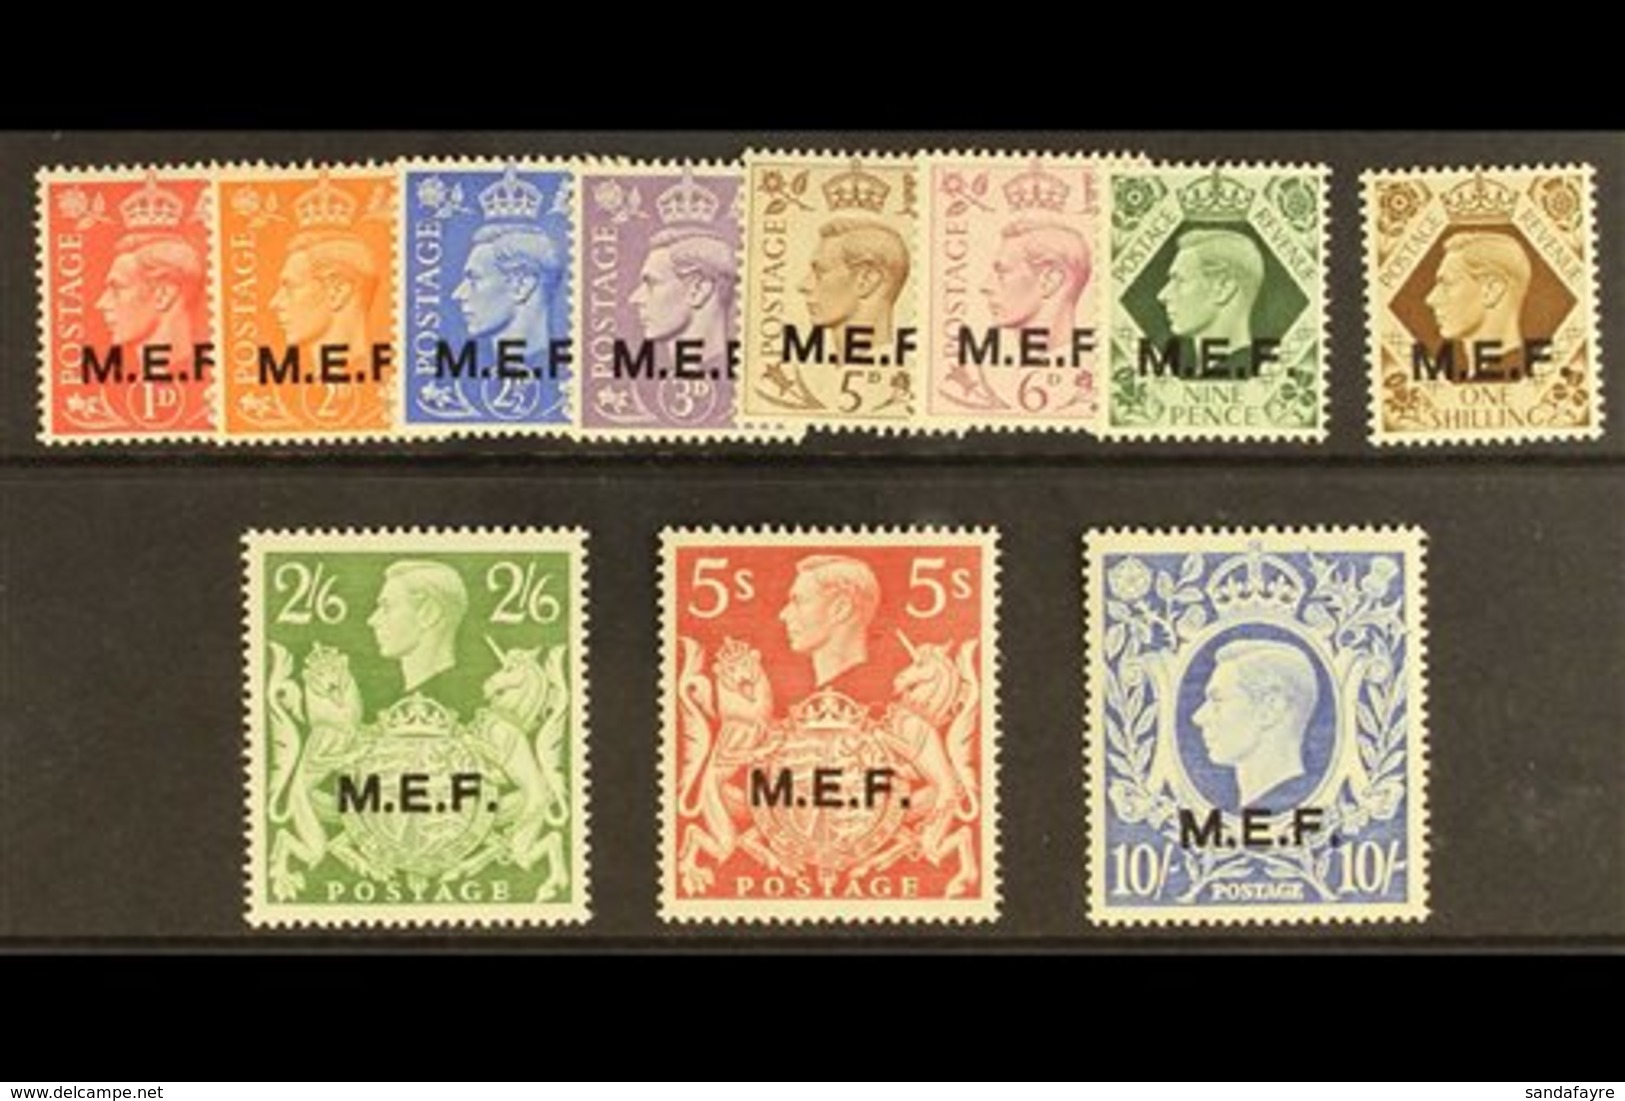 MIDDLE EAST FORCES  1943-47 "M.E.F." Overprints Complete Set, SG M11/M21, Never Hinged Mint. (11 Stamps) For More Images - Africa Oriental Italiana